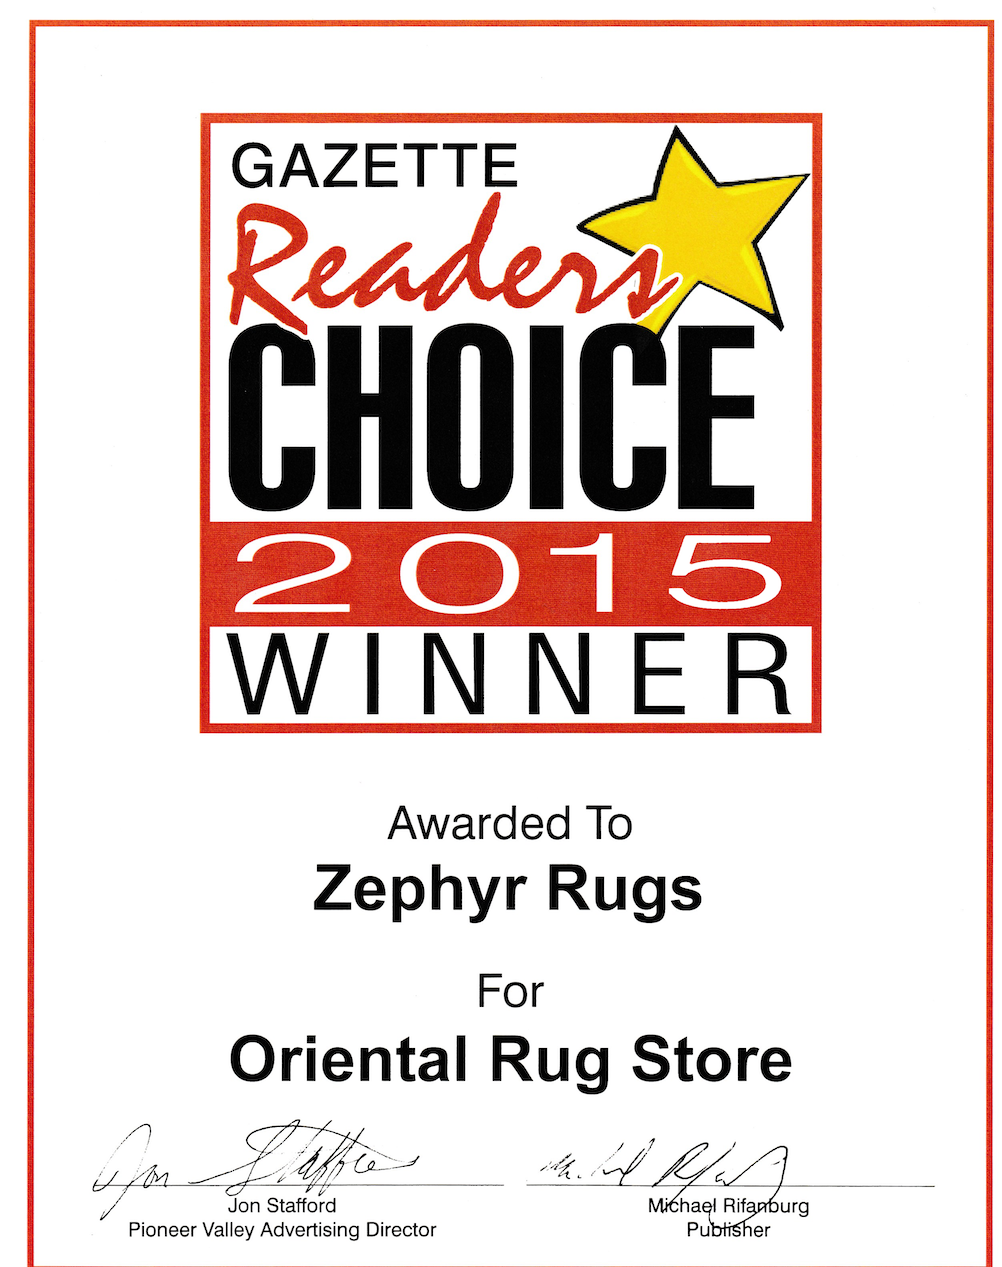 Zephyr Rugs Voted Best Oriental Rug Store by Hampshire Gazette Reader's Choice 2015